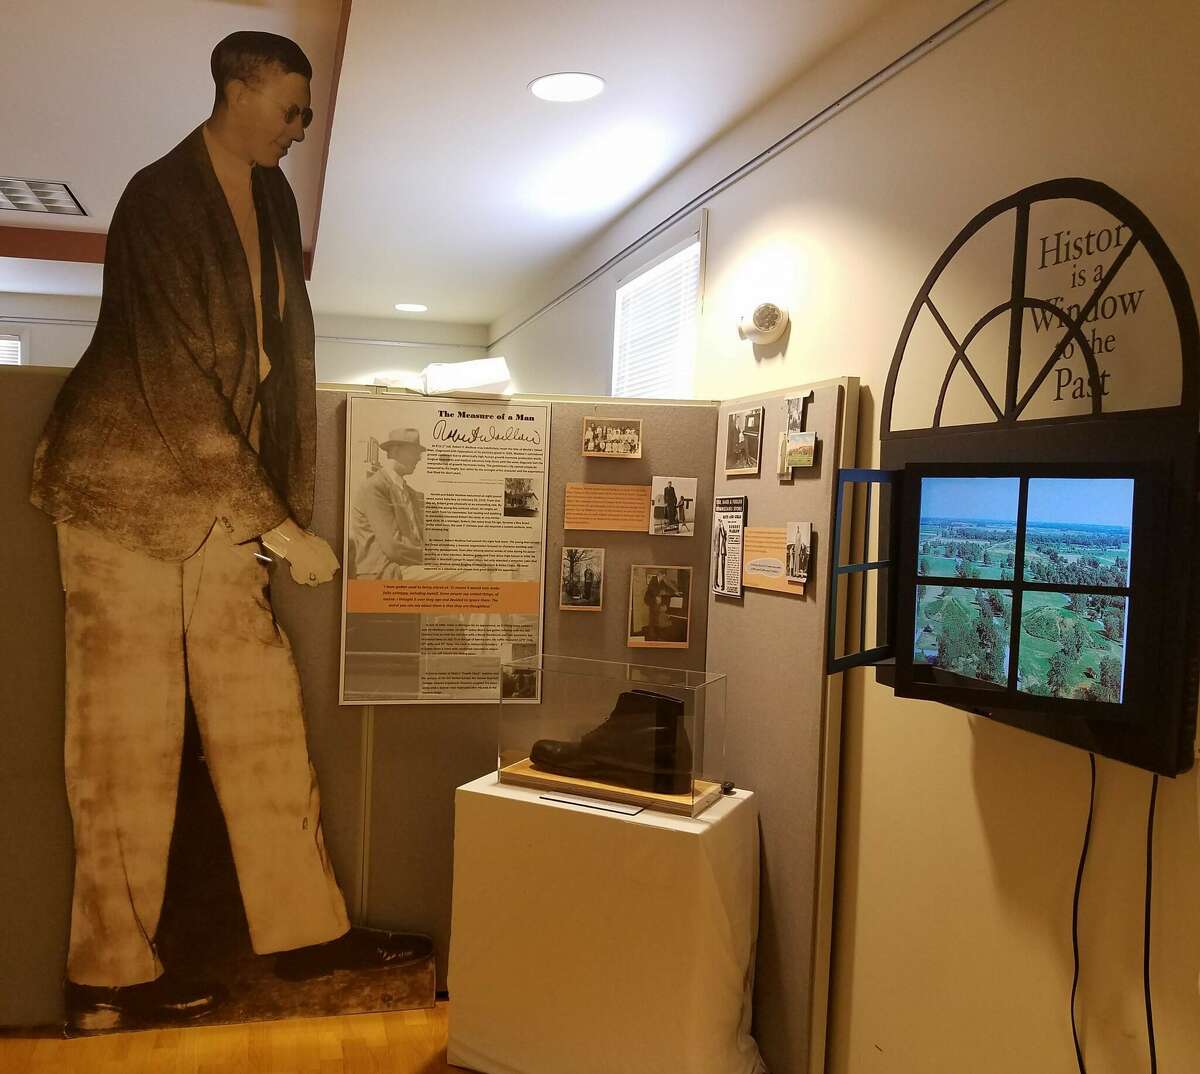 The Madison County Historical Society has added a gallery to the Archival Library at 801 N. Main St., Edwardsville. Pictured is "The Measure of a Man" on Robert Wadlow.